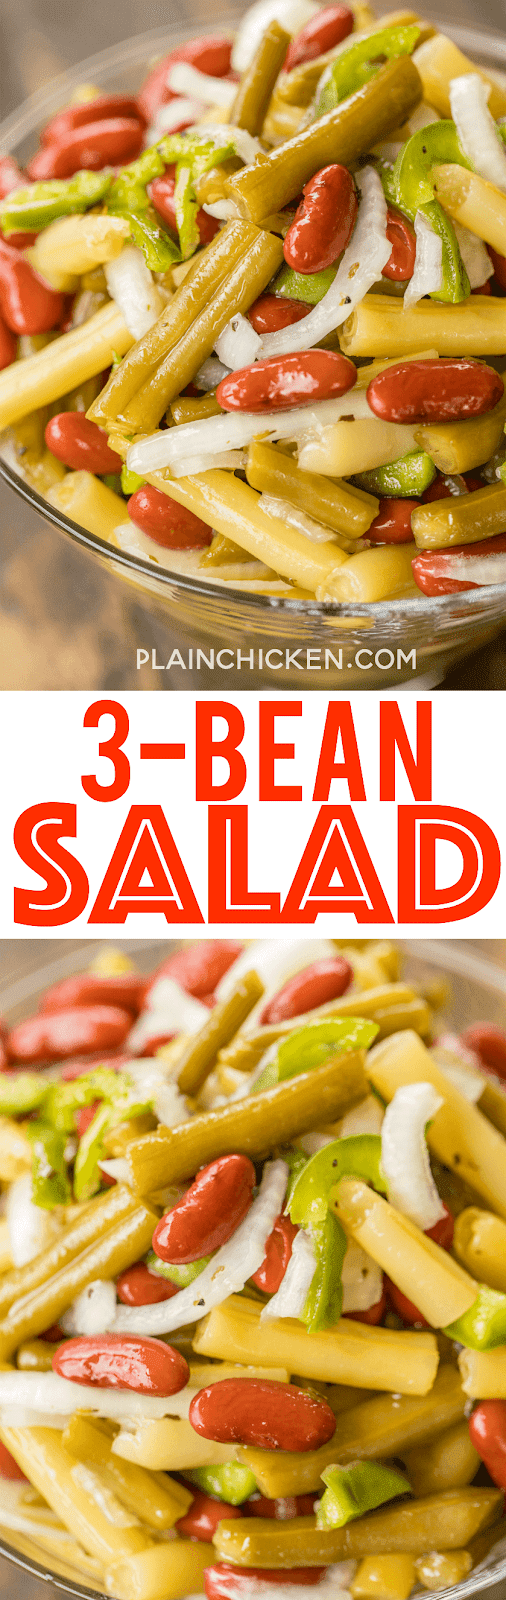 Three Bean Salad - so quick and delicious!! Green Beans, Yellow Wax Beans, Kidney Beans, Vidalia Onion, Green Bell Pepper tossed in sugar, cider vinegar, oil, salt and pepper. Make in advance in refrigerate until ready to serve. Great for potlucks and cookouts! #salad #sidedish #beans #nobake